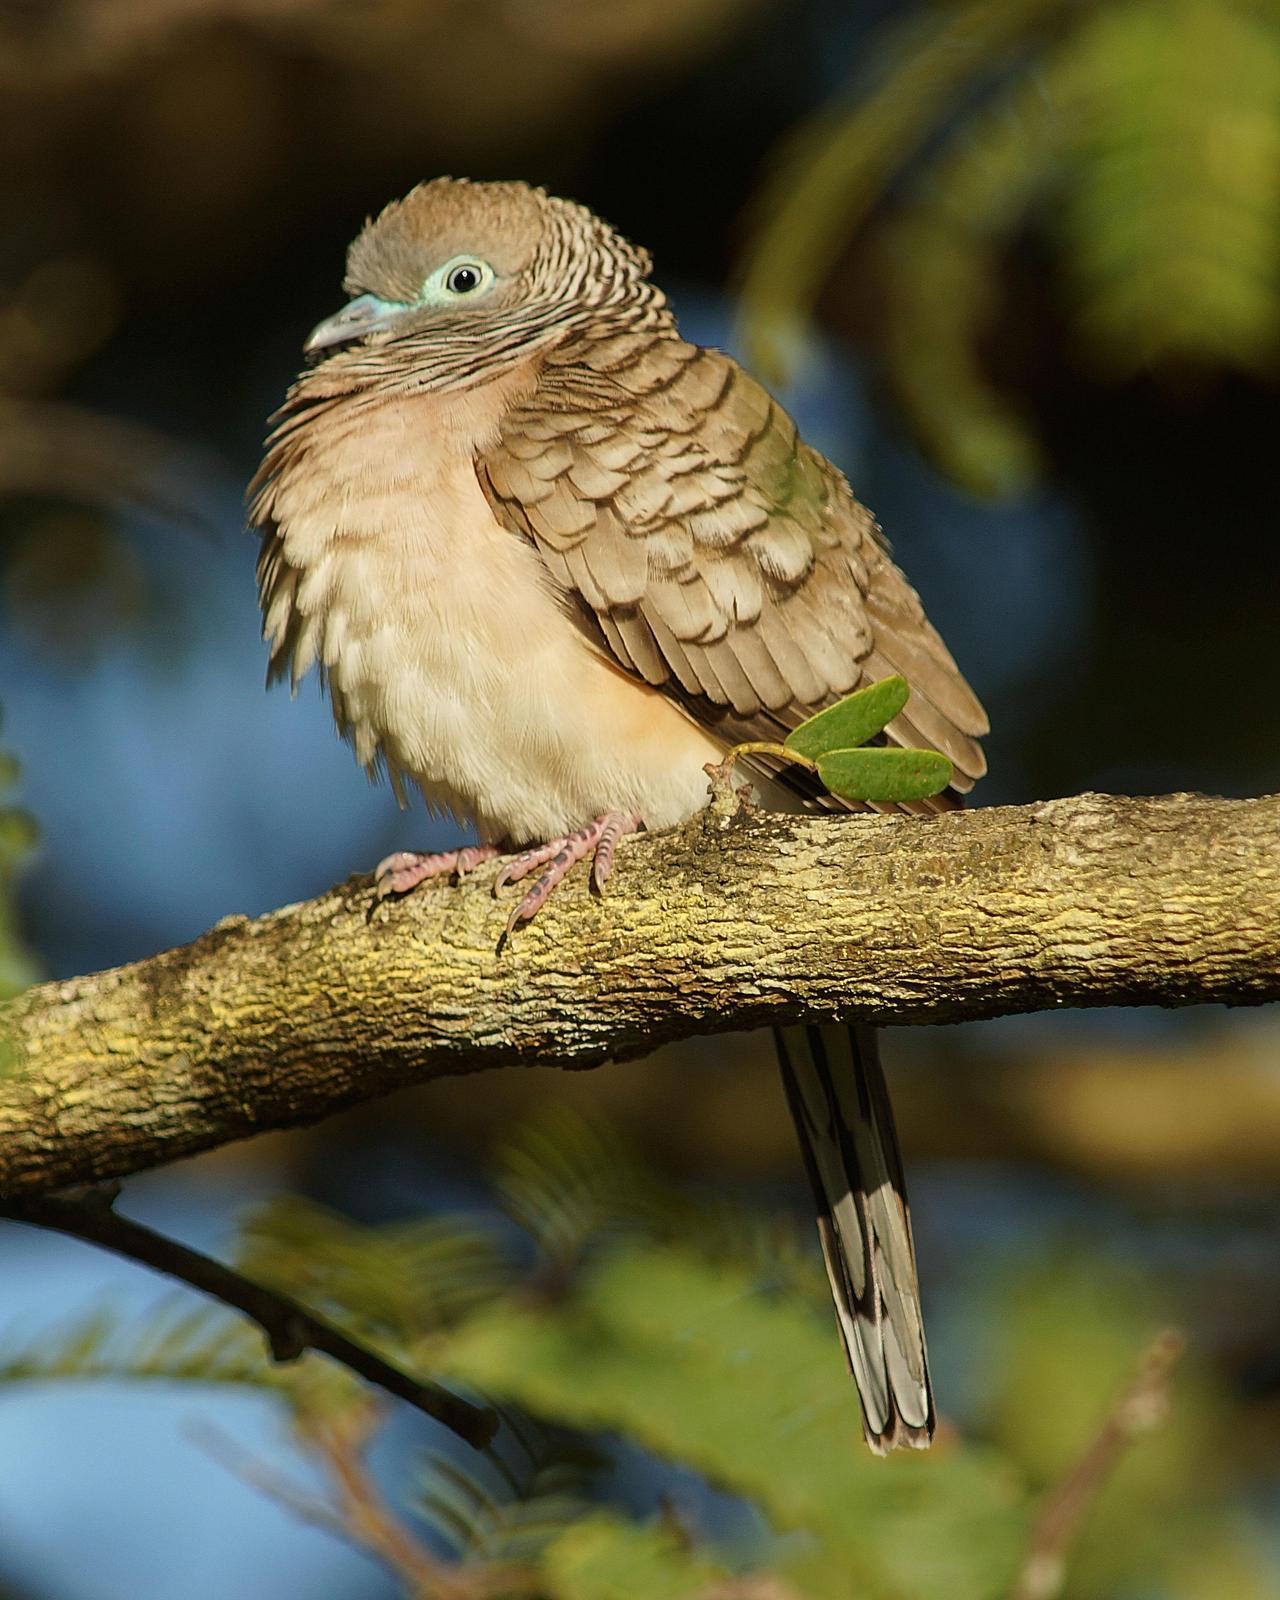 Peaceful Dove Photo by Steve Percival